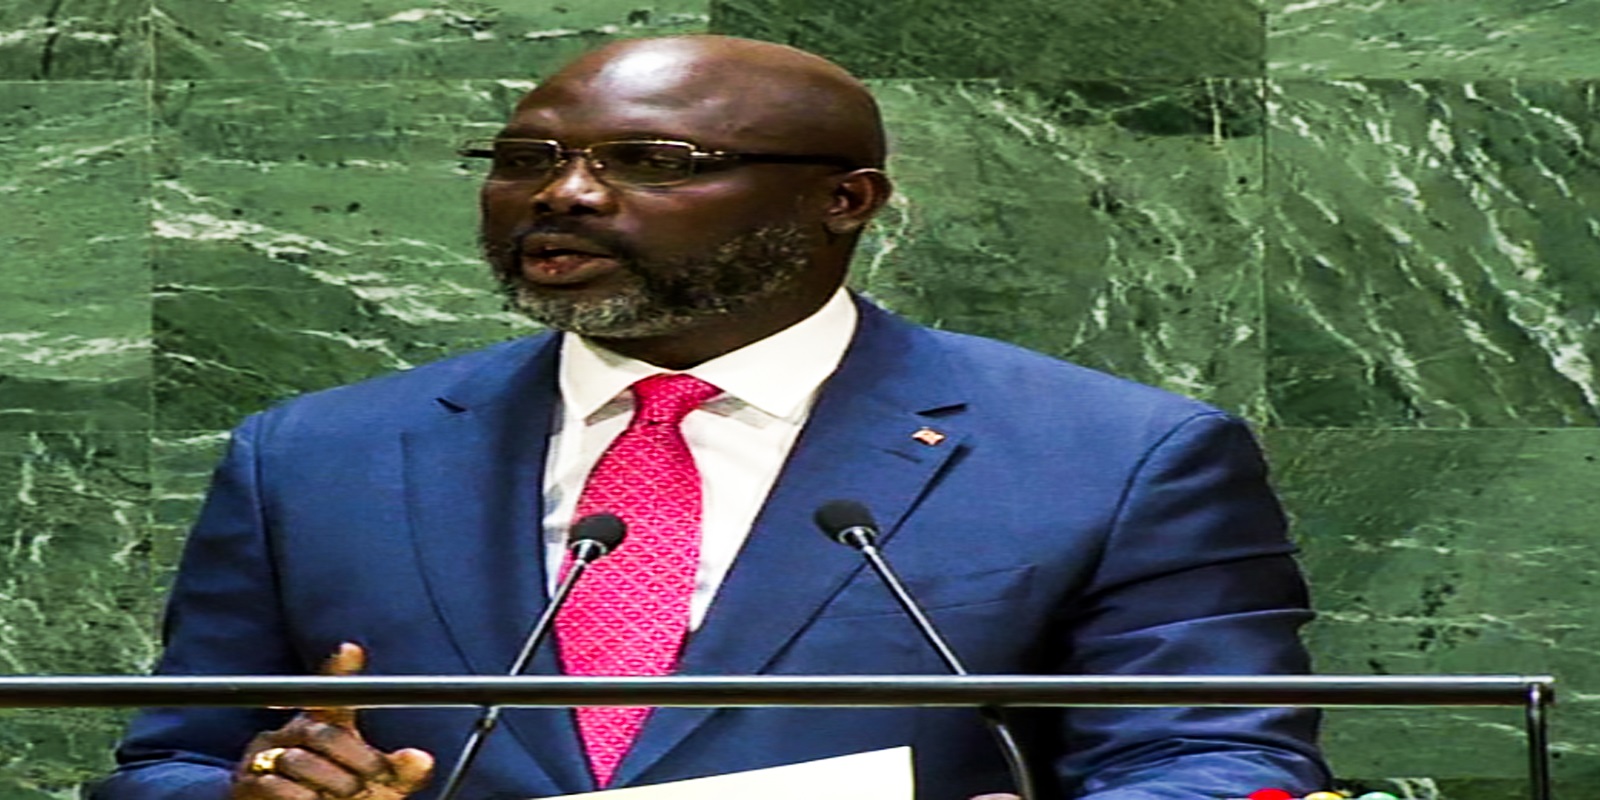 His Excellency Dr. George Manneh addresses the 74th Session of the United Nations General Assembly